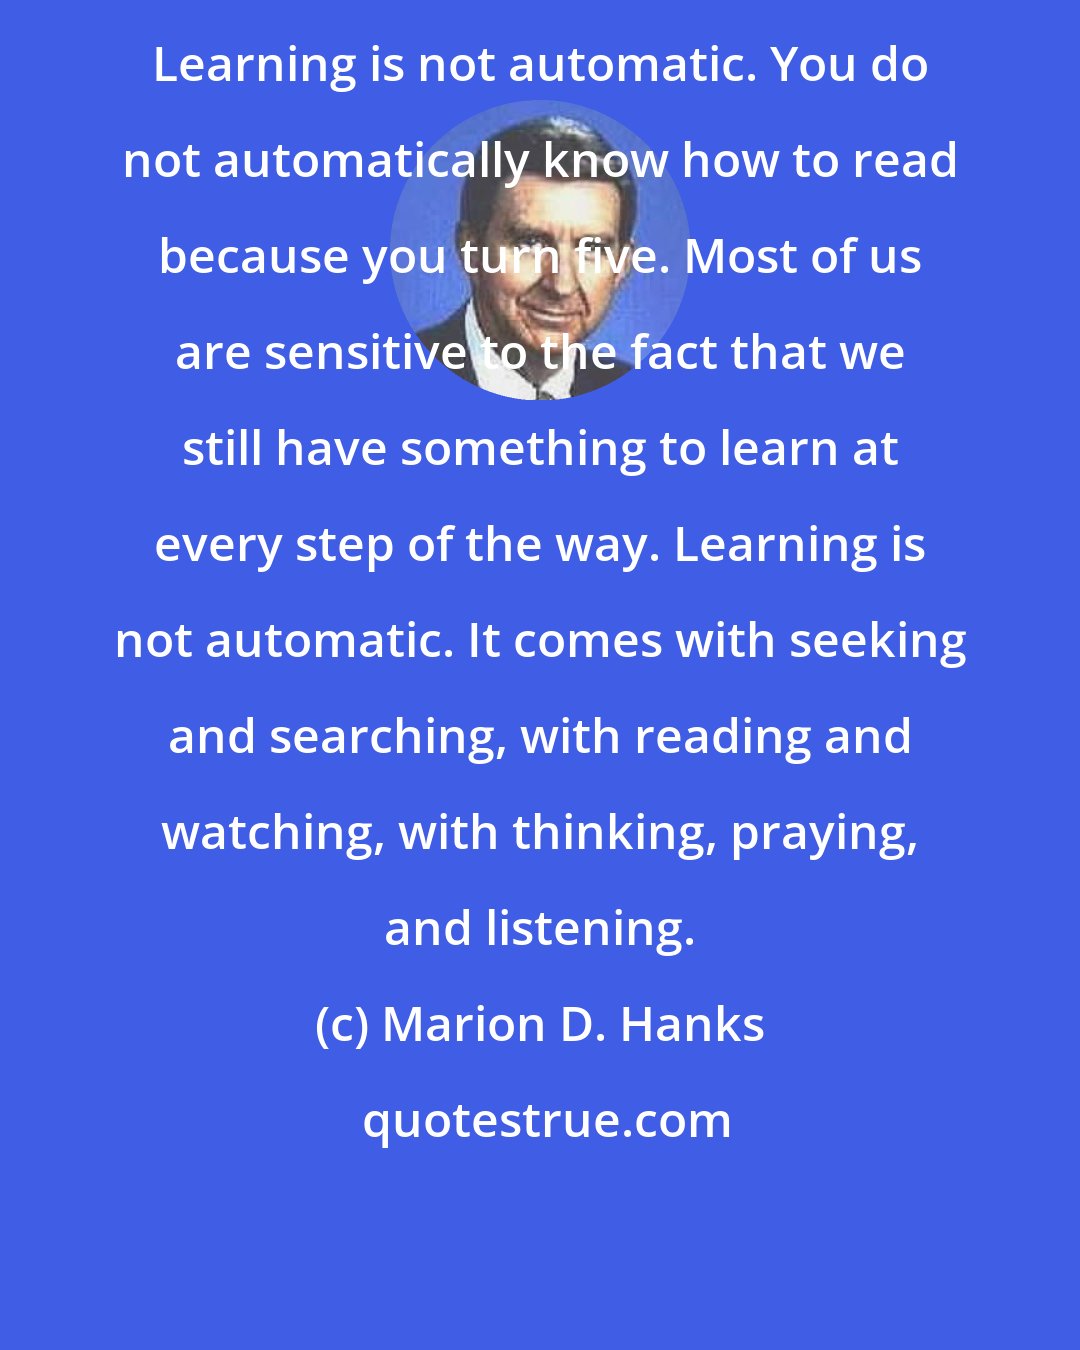 Marion D. Hanks: Learning is not automatic. You do not automatically know how to read because you turn five. Most of us are sensitive to the fact that we still have something to learn at every step of the way. Learning is not automatic. It comes with seeking and searching, with reading and watching, with thinking, praying, and listening.